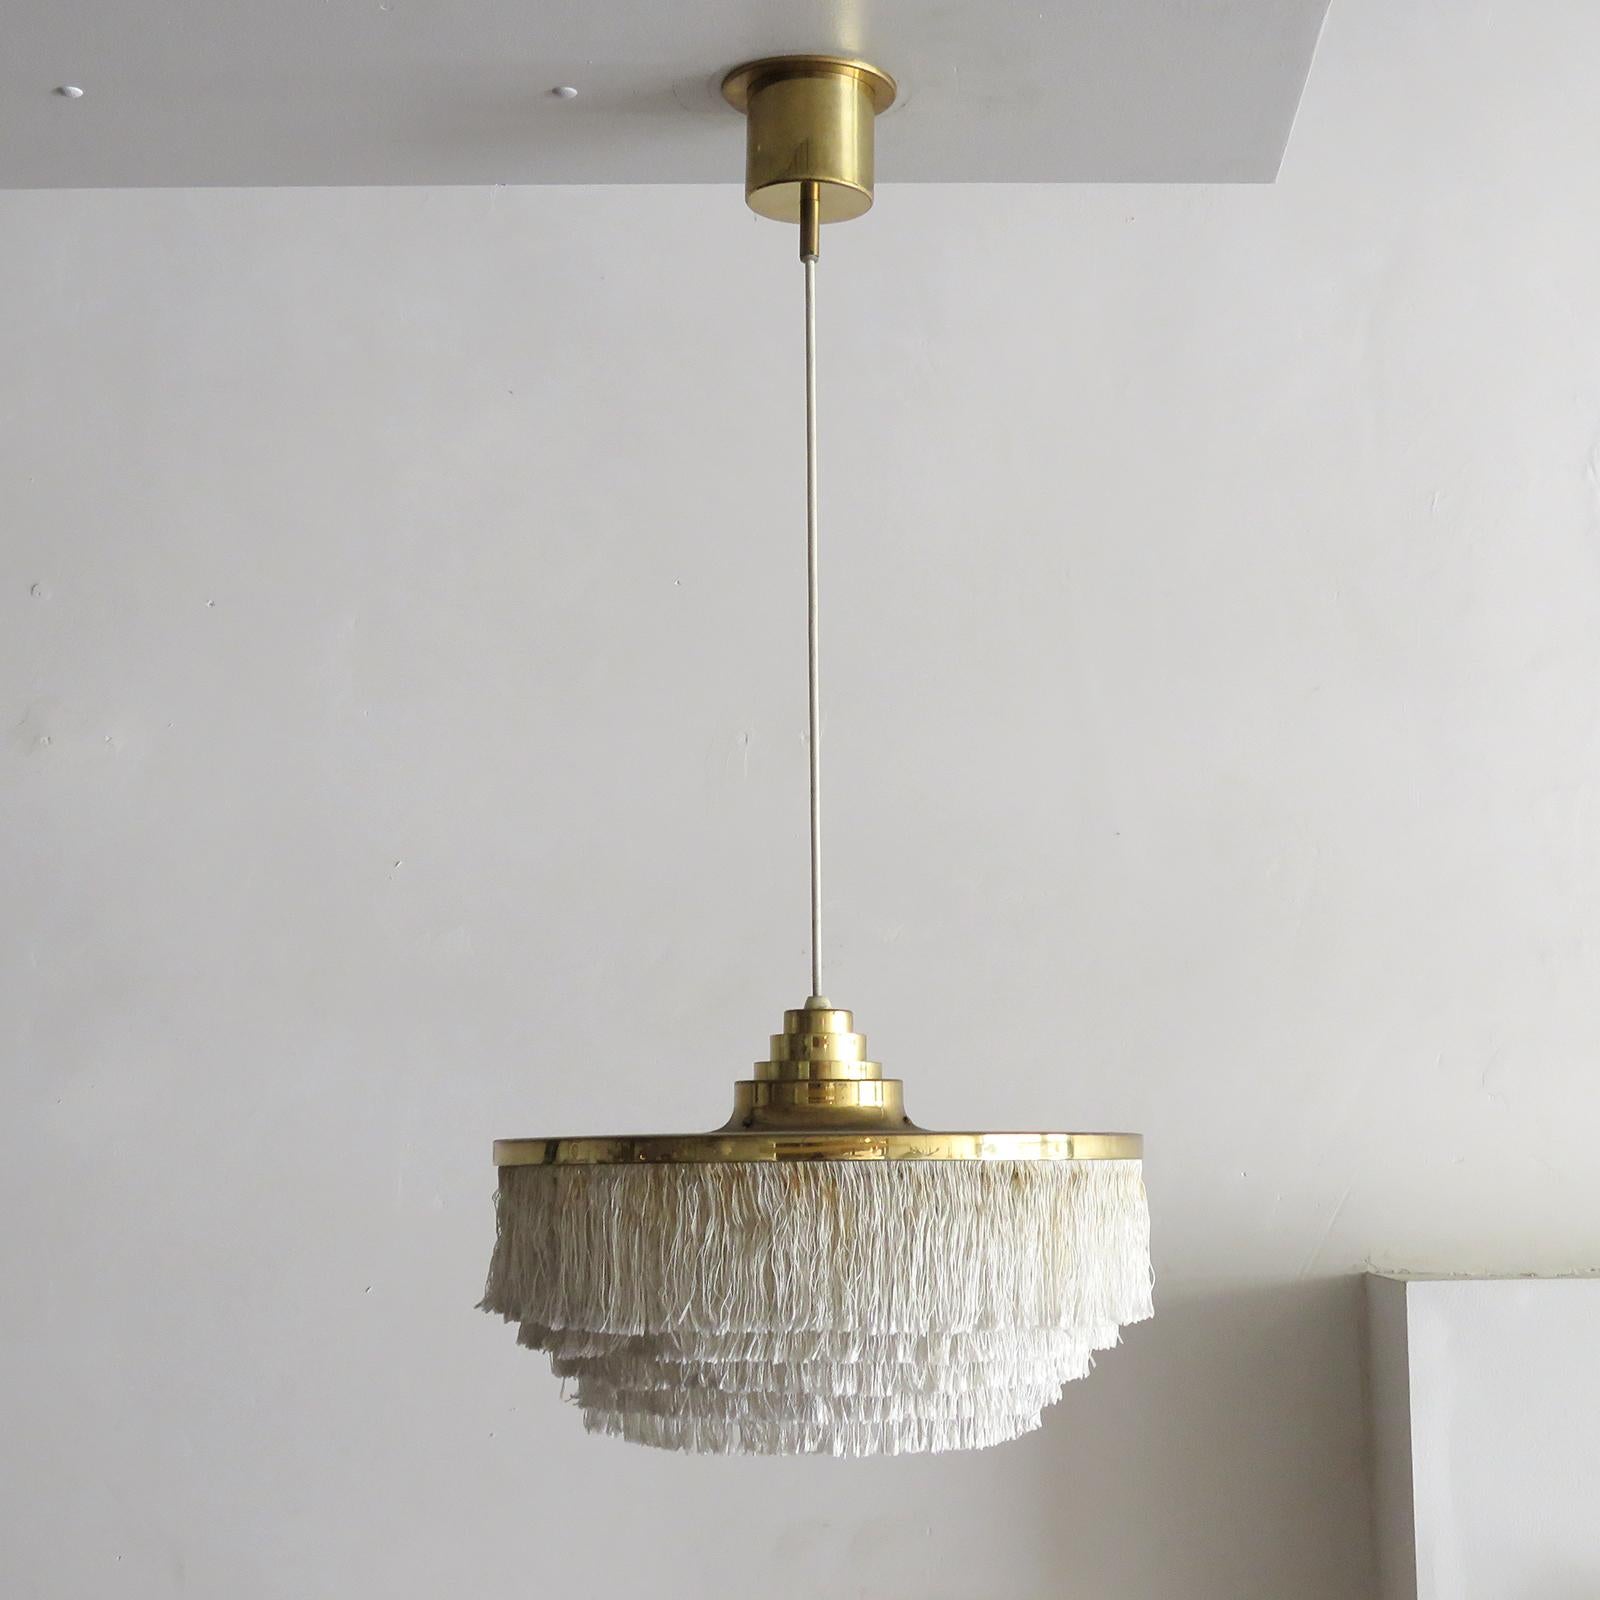 Wonderful pendant lamp by Hans-Agne Jakobsson for Markaryd, Sweden, 1960, with five tiers of off-white fringe silk cord with brass hardware frame and original brass canopy. Overall drop can be customized, wired for US standards, one E27 socket, max.